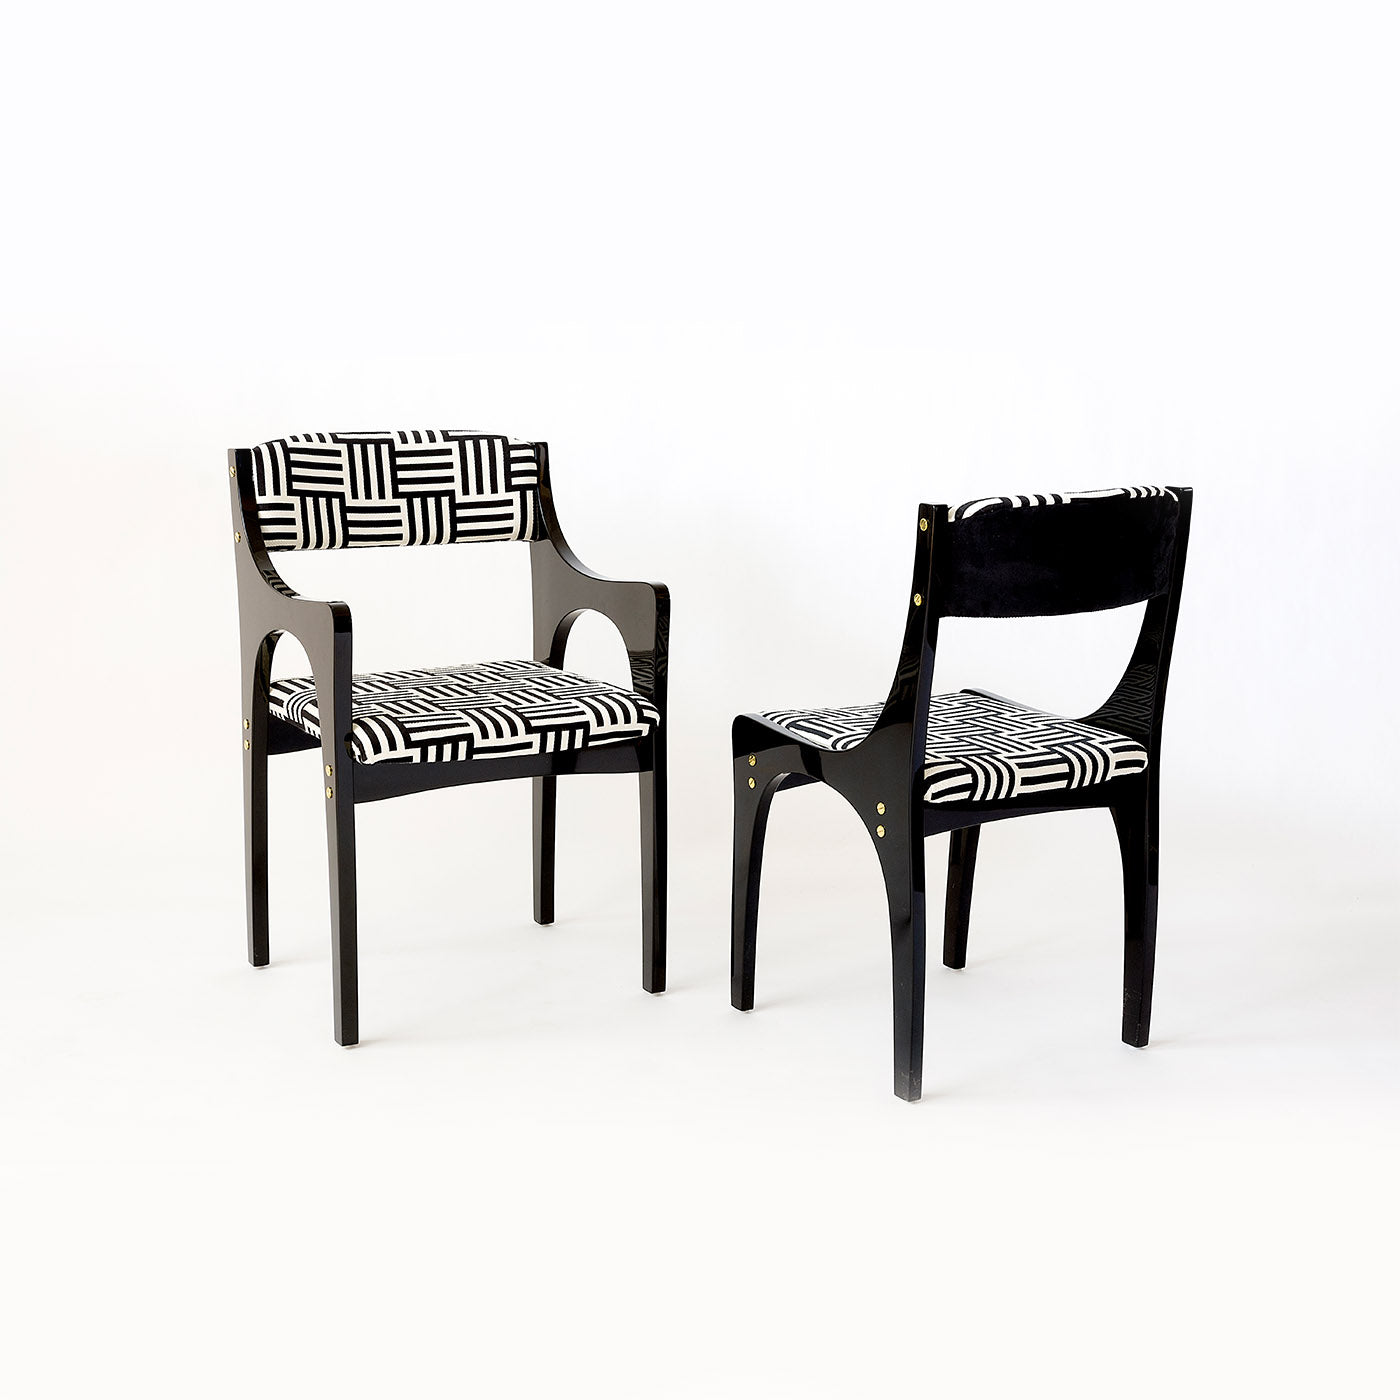 Lola 50's-Inspired Black & White Chair With Arms - Alternative view 3